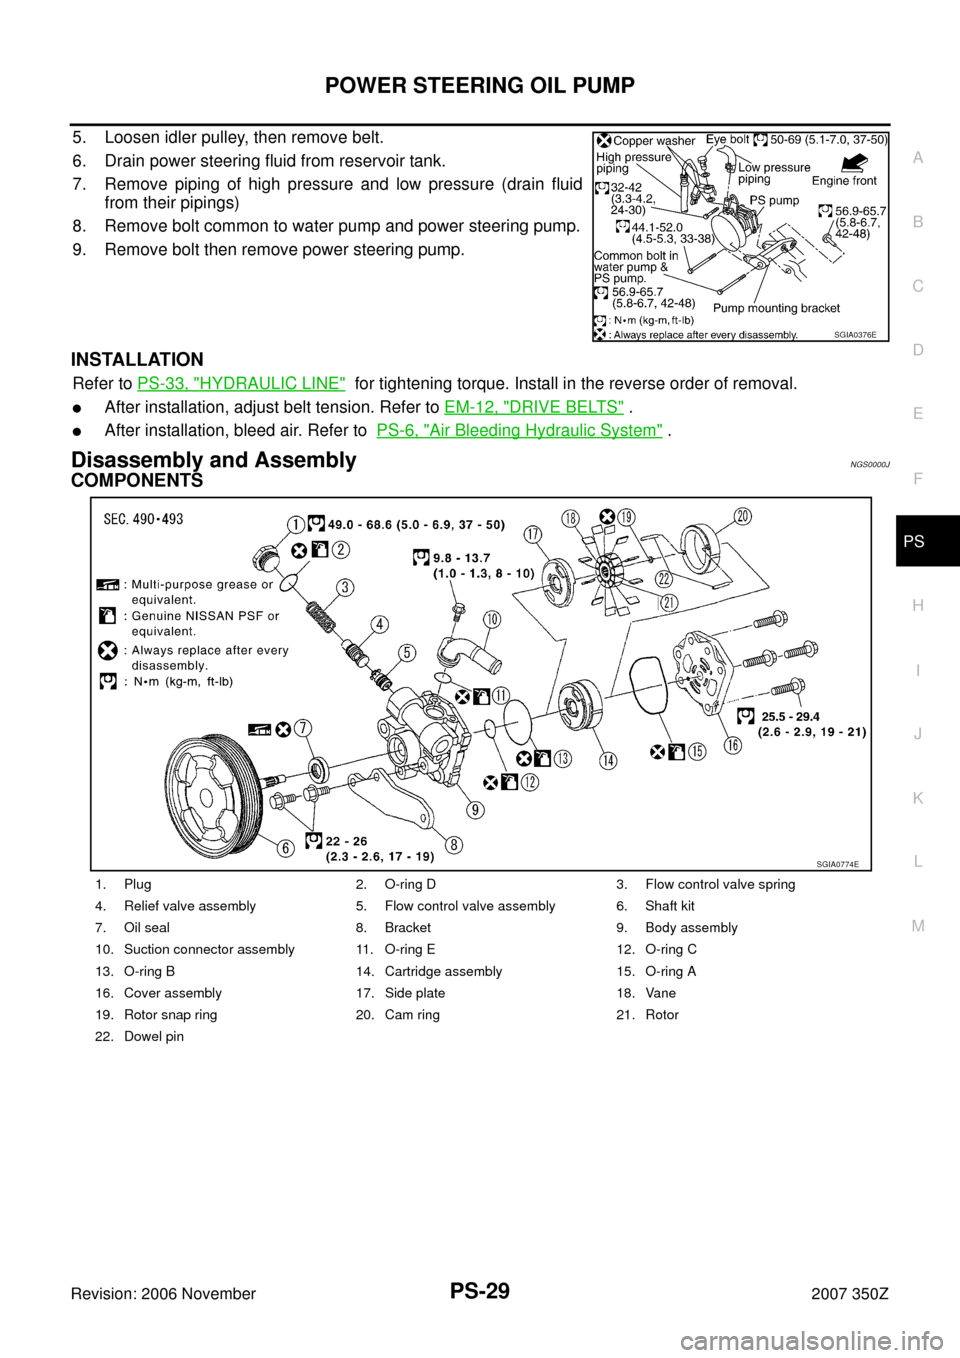 NISSAN 350Z 2007 Z33 Power Steering System Workshop Manual POWER STEERING OIL PUMP
PS-29
C
D
E
F
H
I
J
K
L
MA
B
PS
Revision: 2006 November2007 350Z
5. Loosen idler pulley, then remove belt.
6. Drain power steering fluid from reservoir tank.
7. Remove piping o